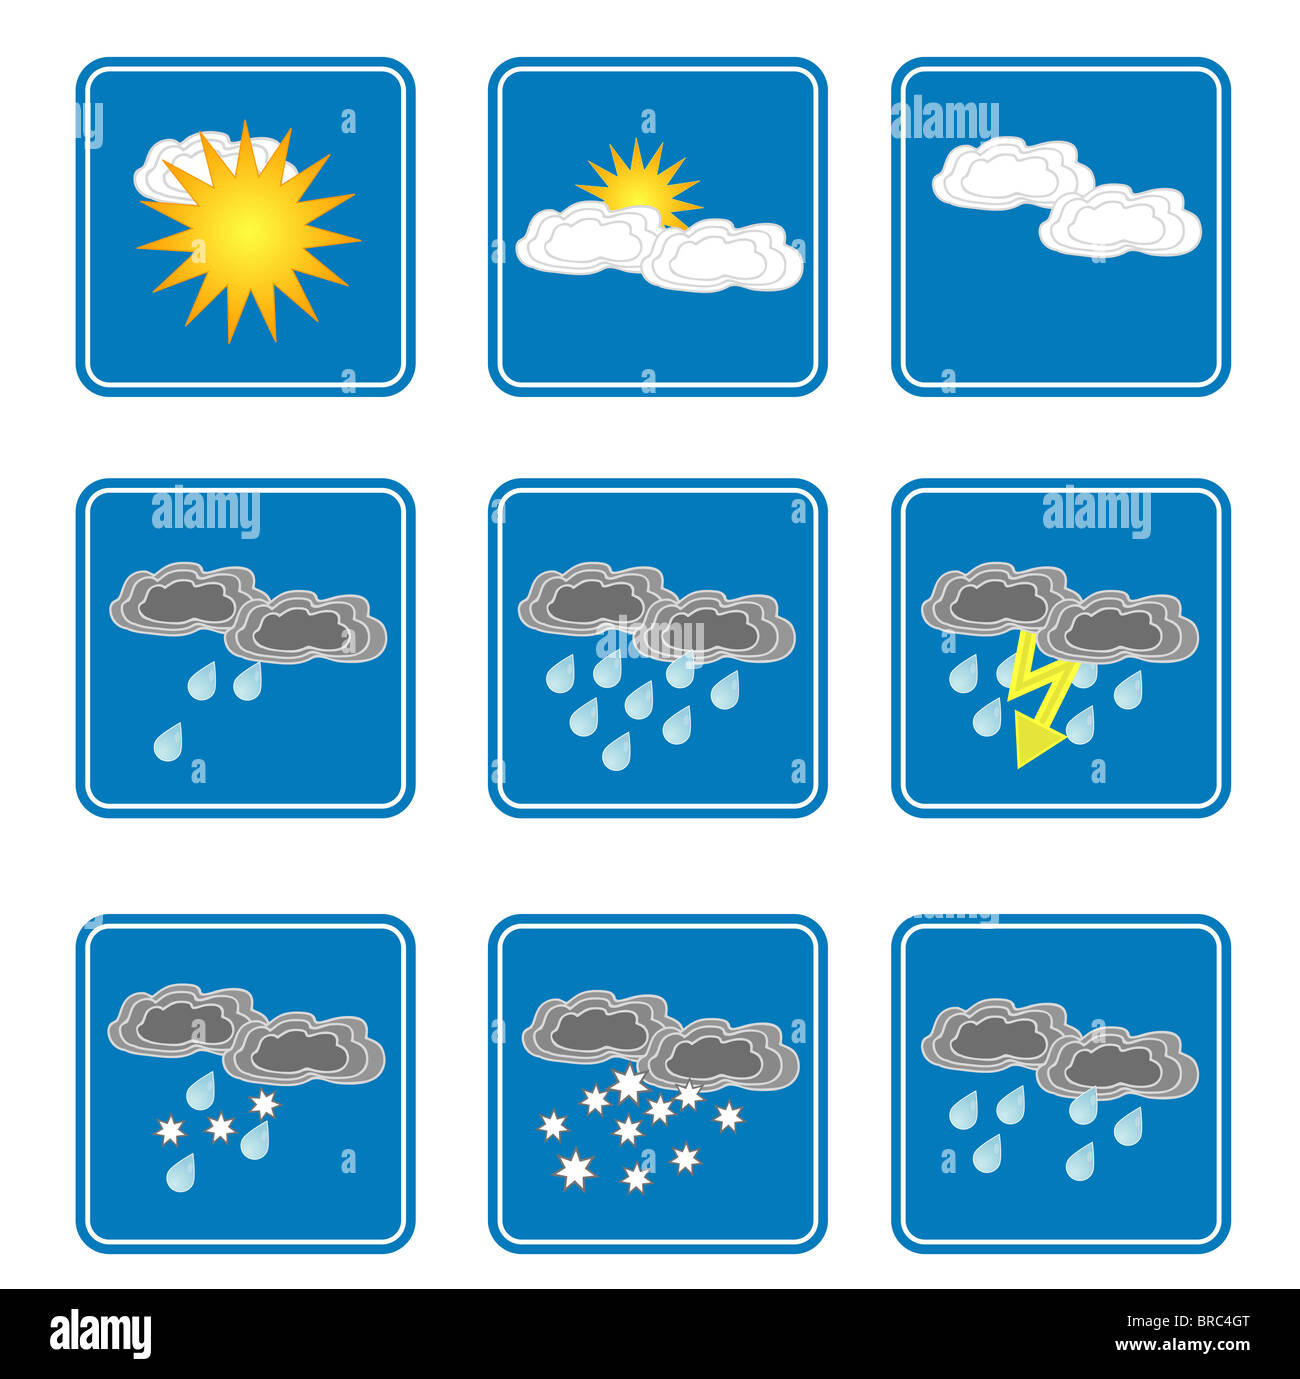 Several blue icons showing different weather situations. All on white background. Stock Photo